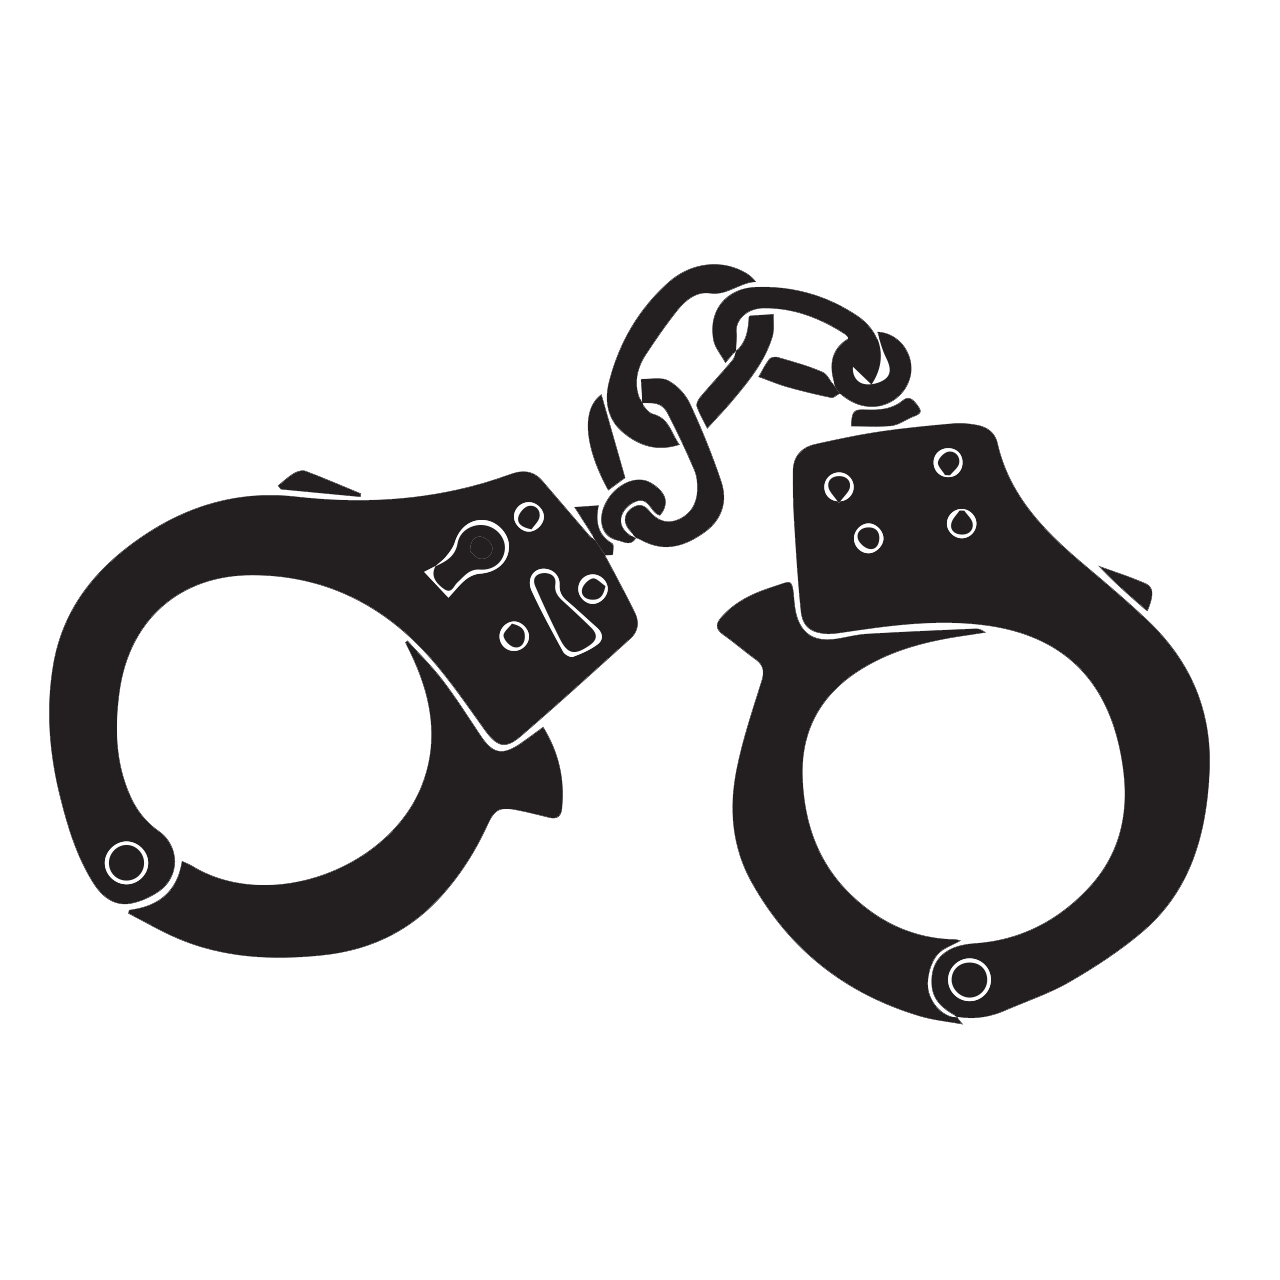 Handcuffs Police officer Clip art - handcuffs png download - 1280*1280